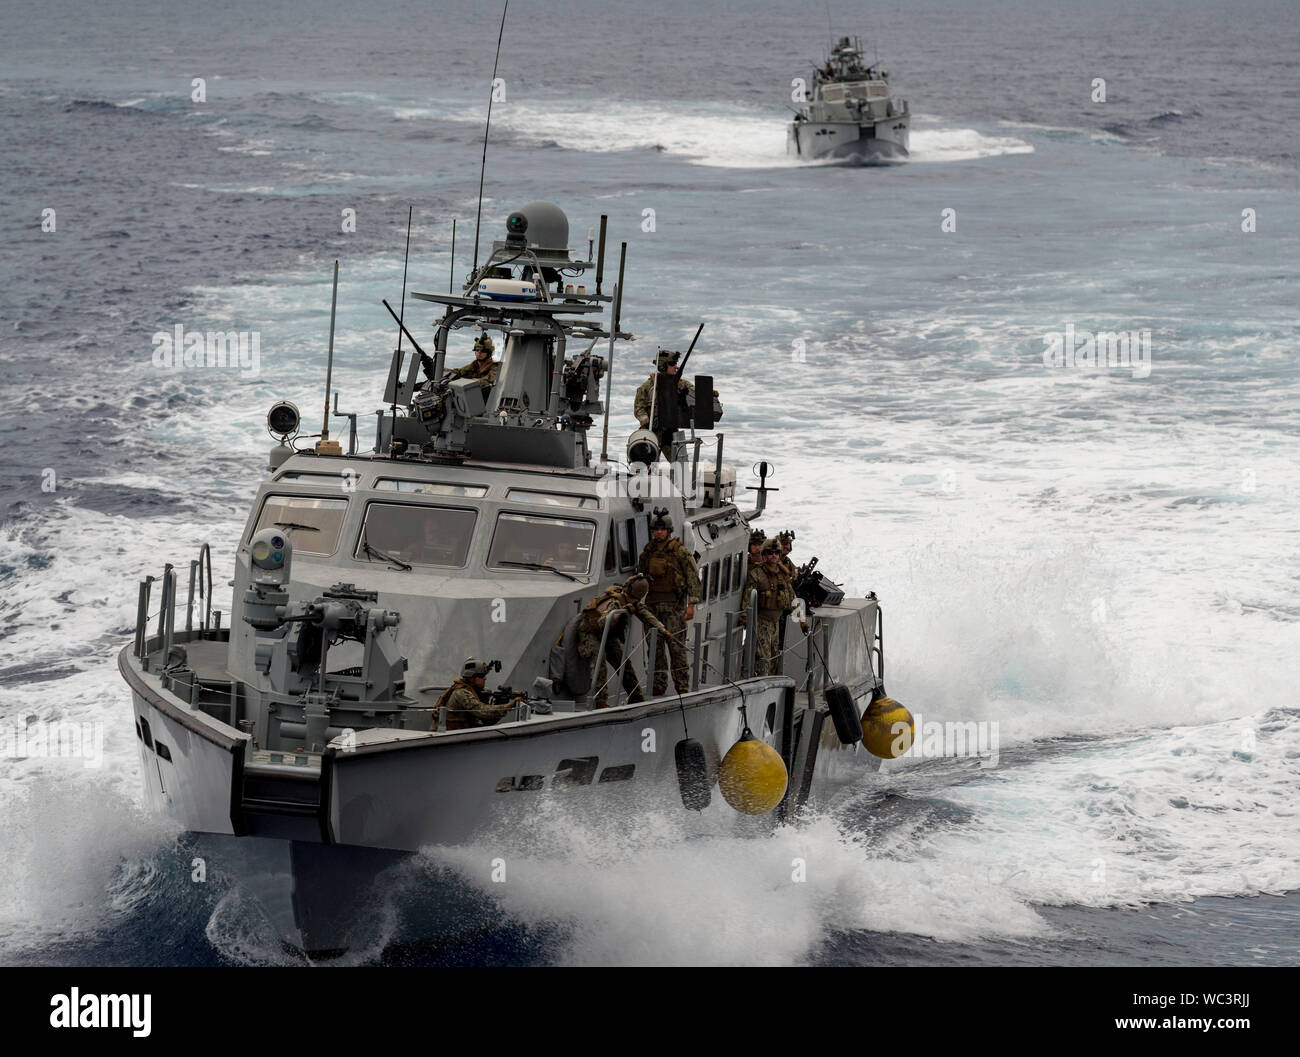 190826-N-LN093-1110  SANTA RITA, Guam (Aug. 26, 2019) Mark VI patrol boats attached to Coastal Riverine Squadron (CRS) 2 with embarked Marines assigned to 3rd Reconnaissance Battalion, 3rd Marine Division and Clearance Divers assigned to the Royal Canadian Navy’s Fleet Diving Pacific and Atlantic Units, navigate near Apra Harbor, during a visit, board, search and seizure (VBSS) subject matter expert knowledge exchange as part of Exercise HYDRACRAB. HYDRACRAB is a quadrilateral exercise conducted by forces from Australia, Canada, New Zealand, and U.S. Naval forces. The purpose of this exercise Stock Photo